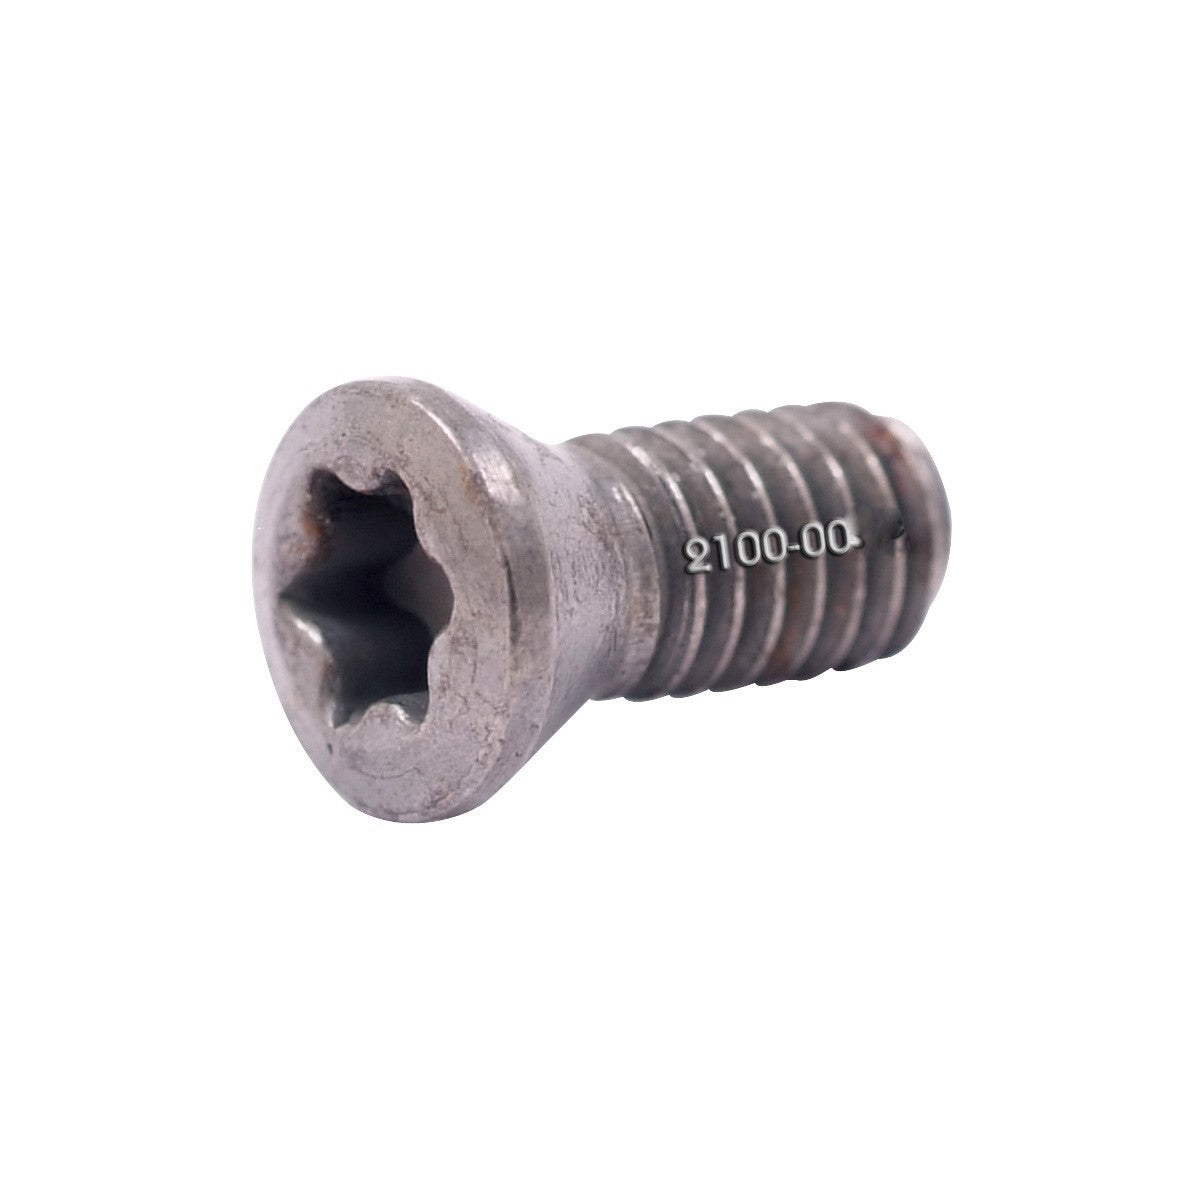 M3.5 X 8MM OVERALL LENGTH SCREW